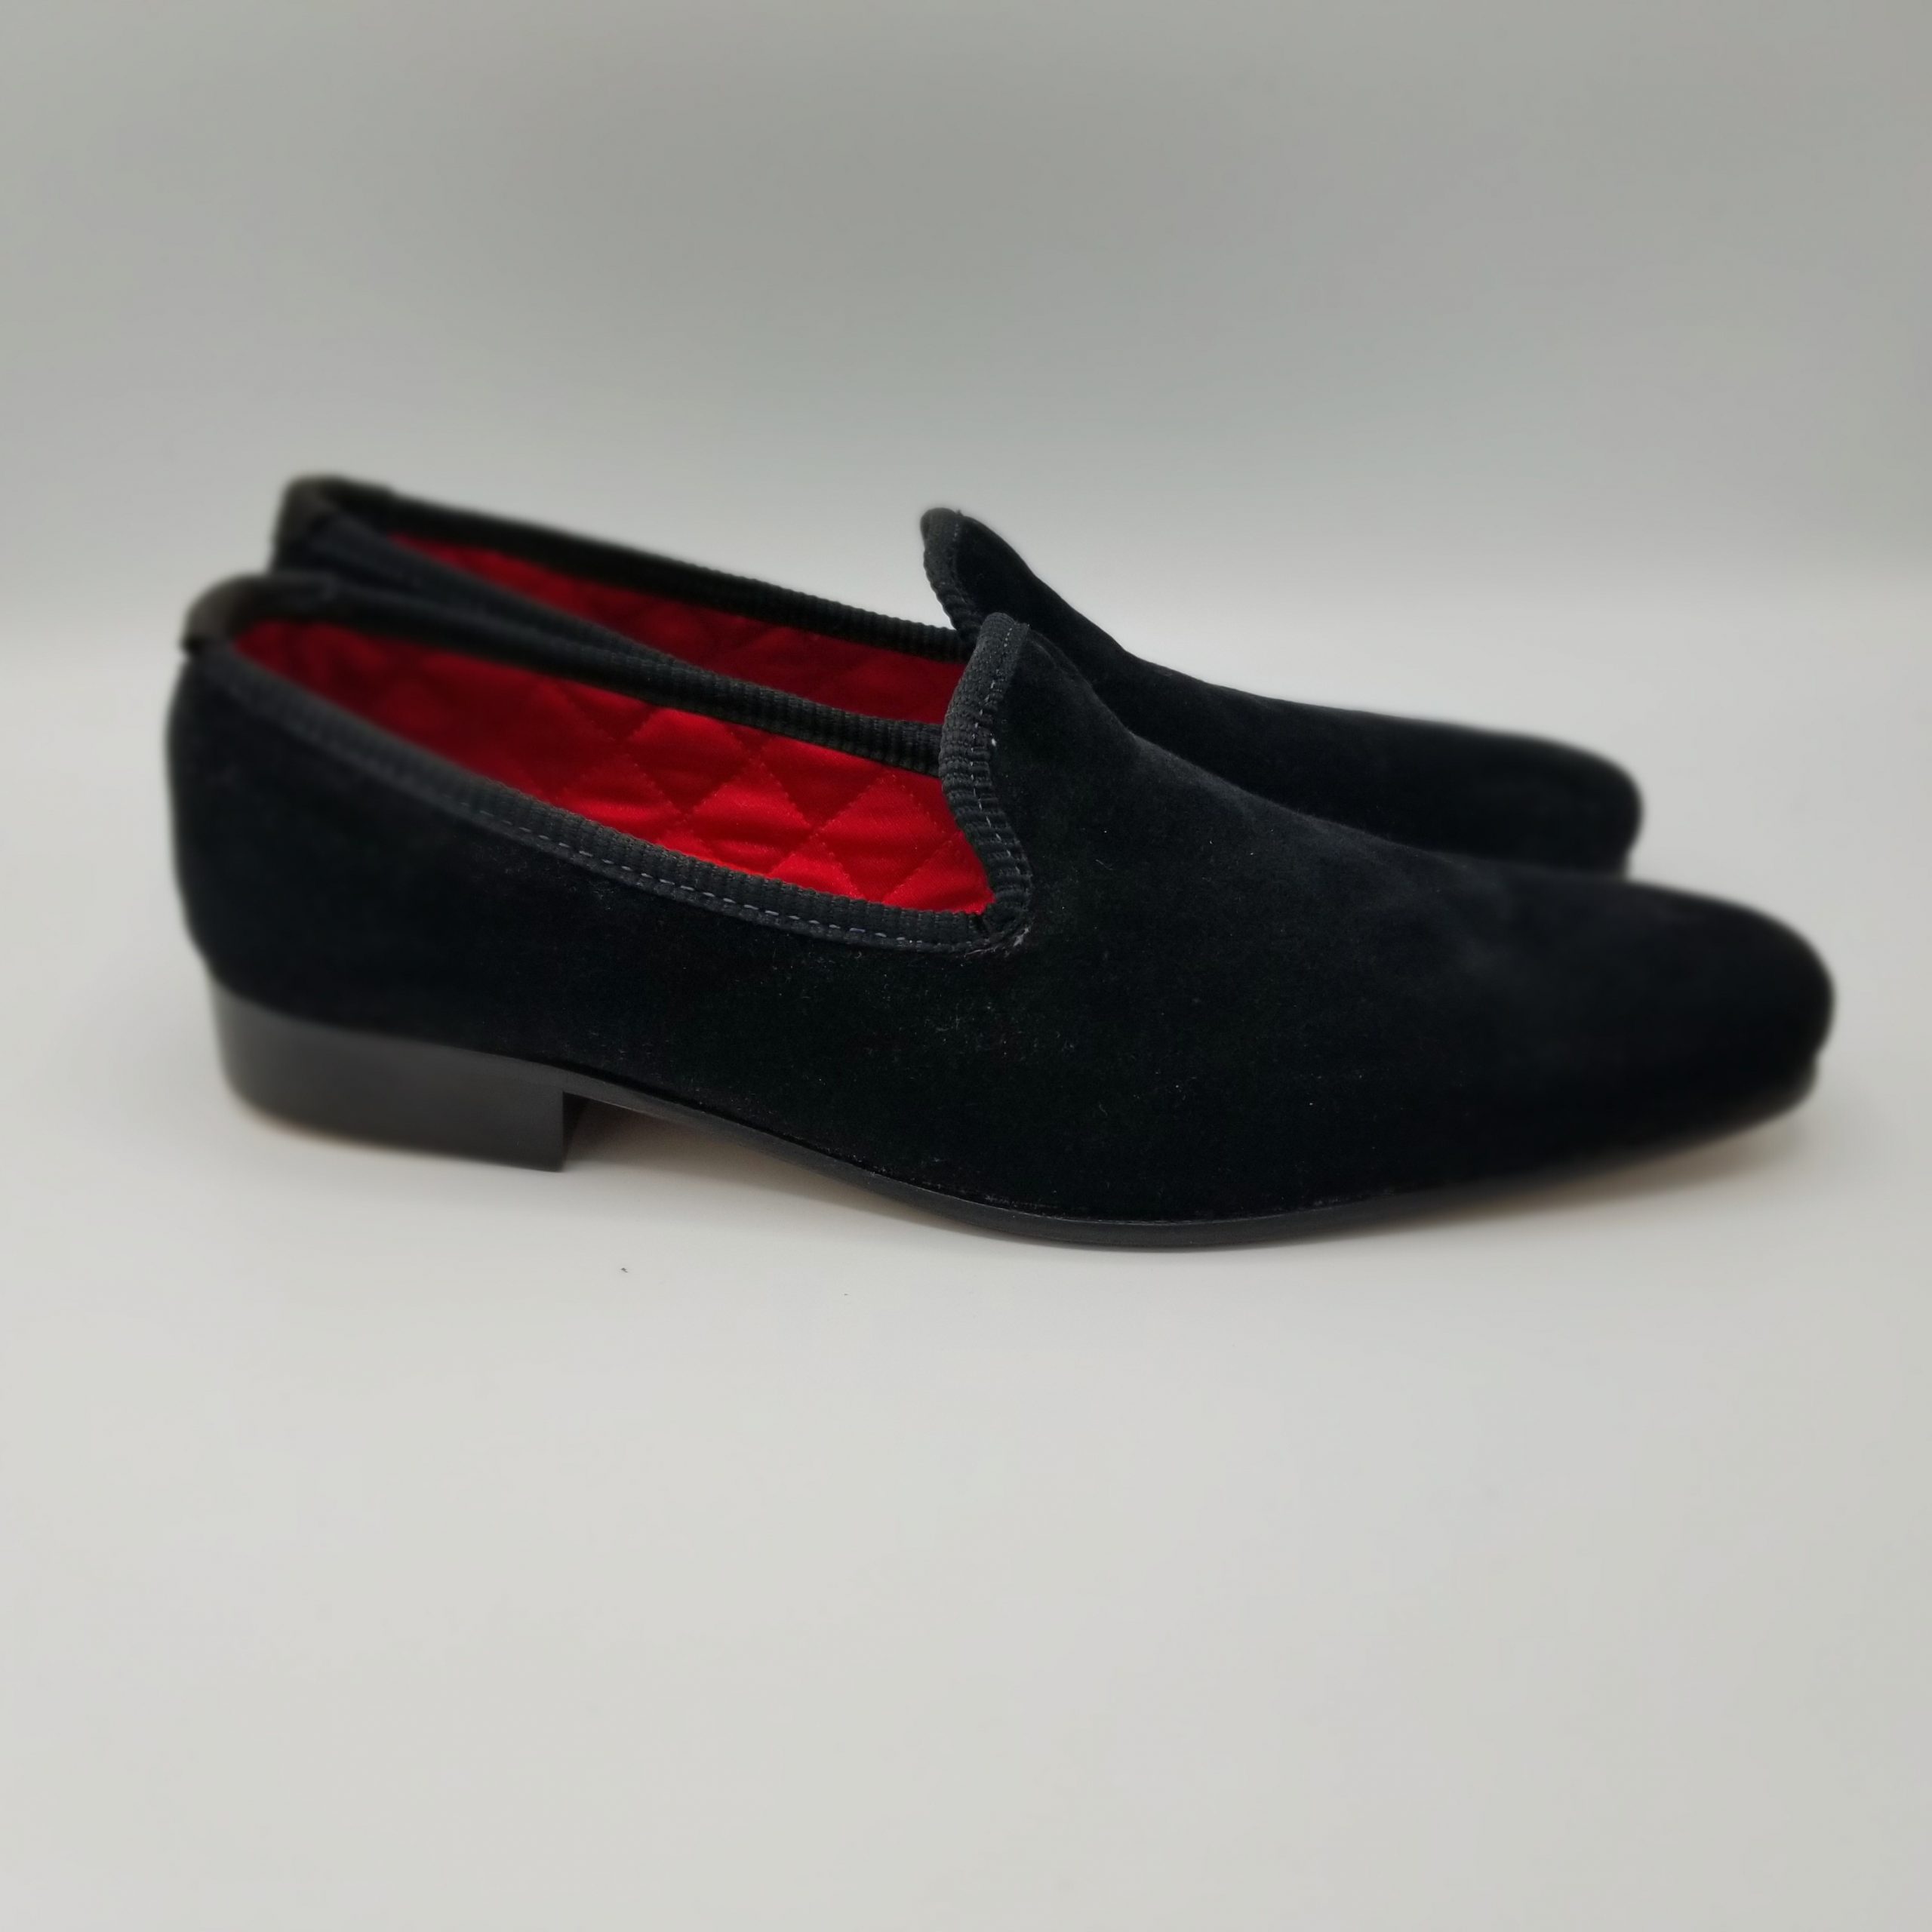 black loafers with red inner lining